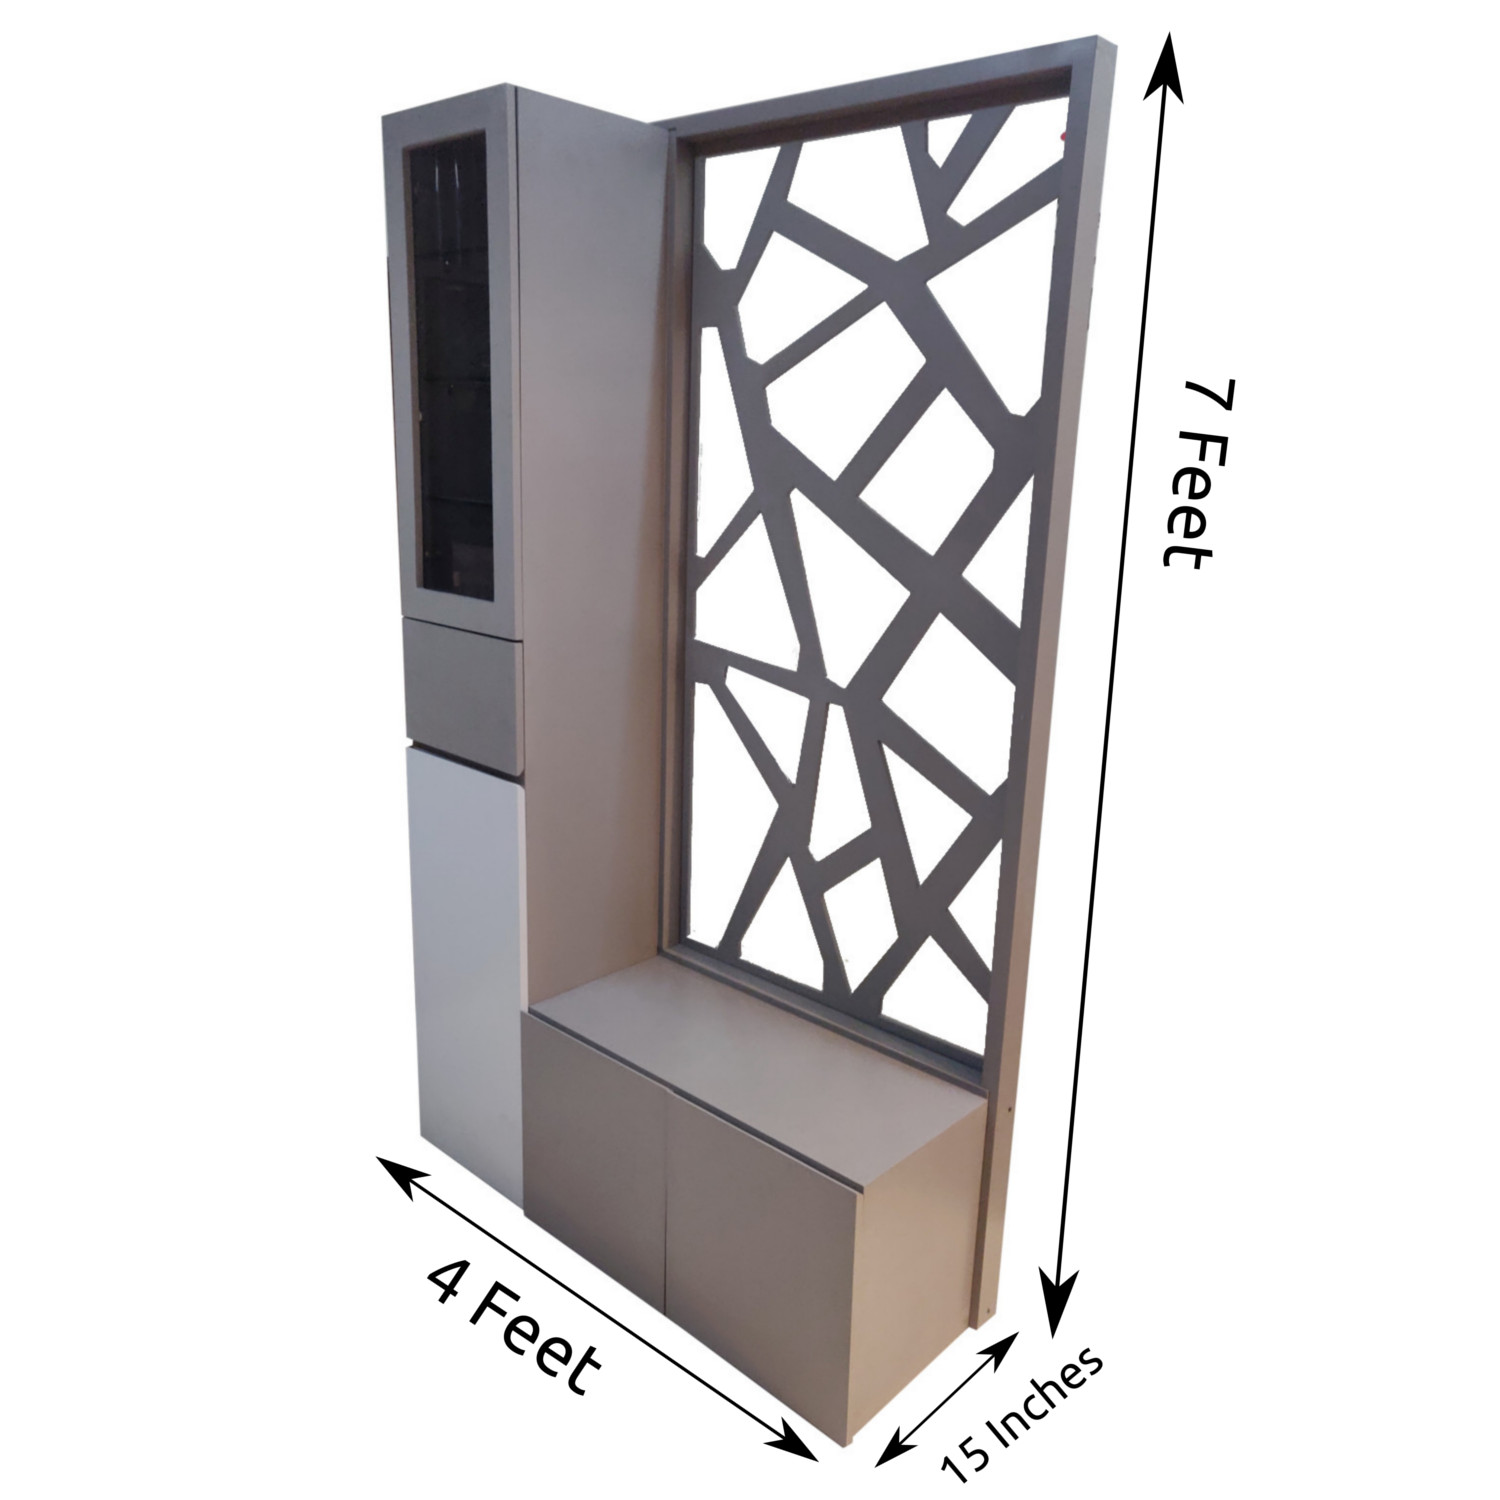 Facet hanging room divider 102 x 226cm with sliding solution • Bloomming